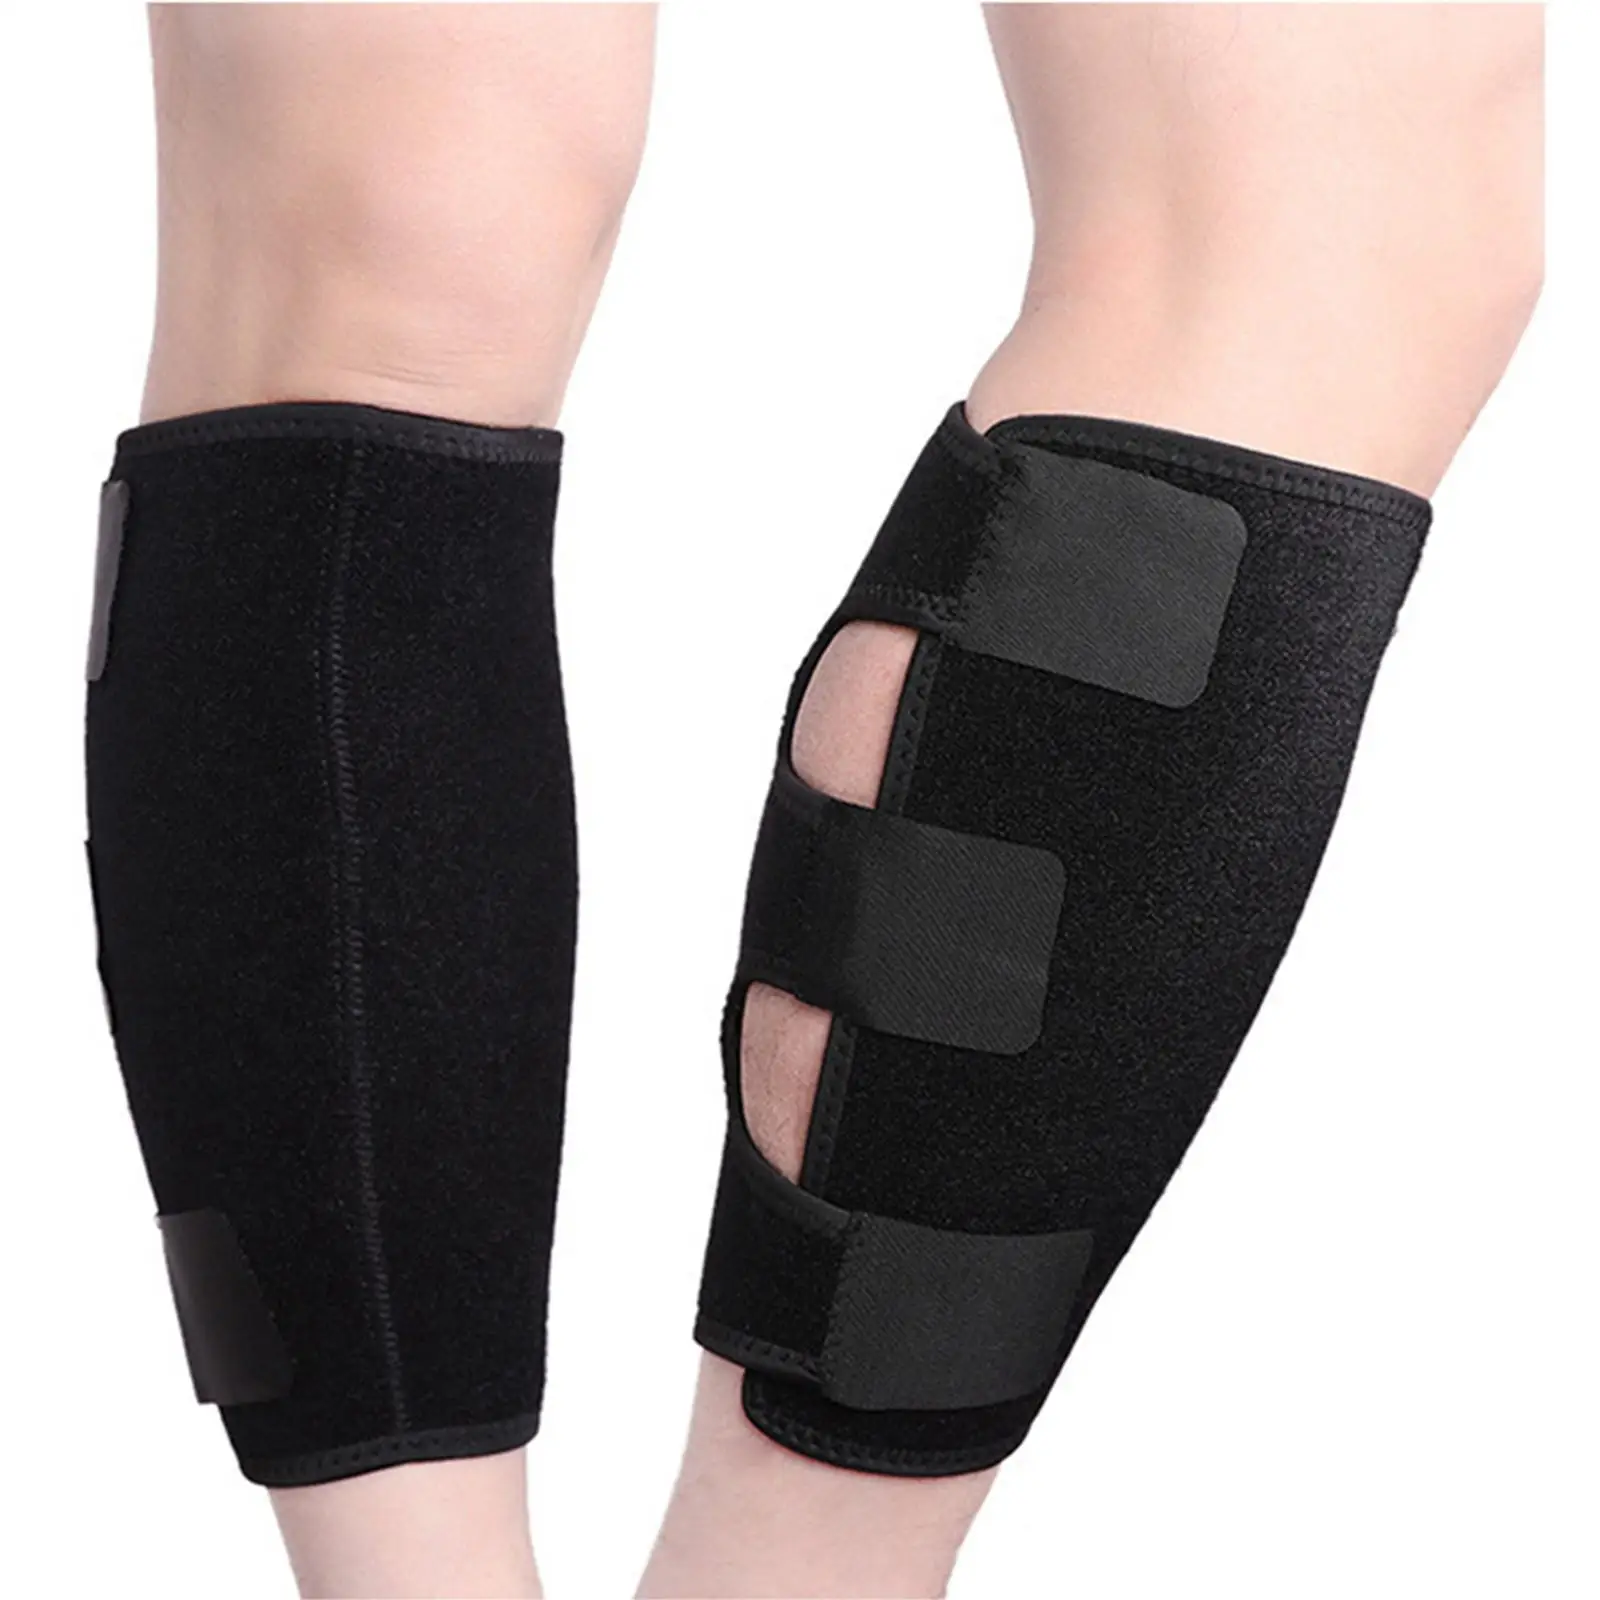 Calf Support Brace Adjustable Durable for Men and Women Workout Outdoor